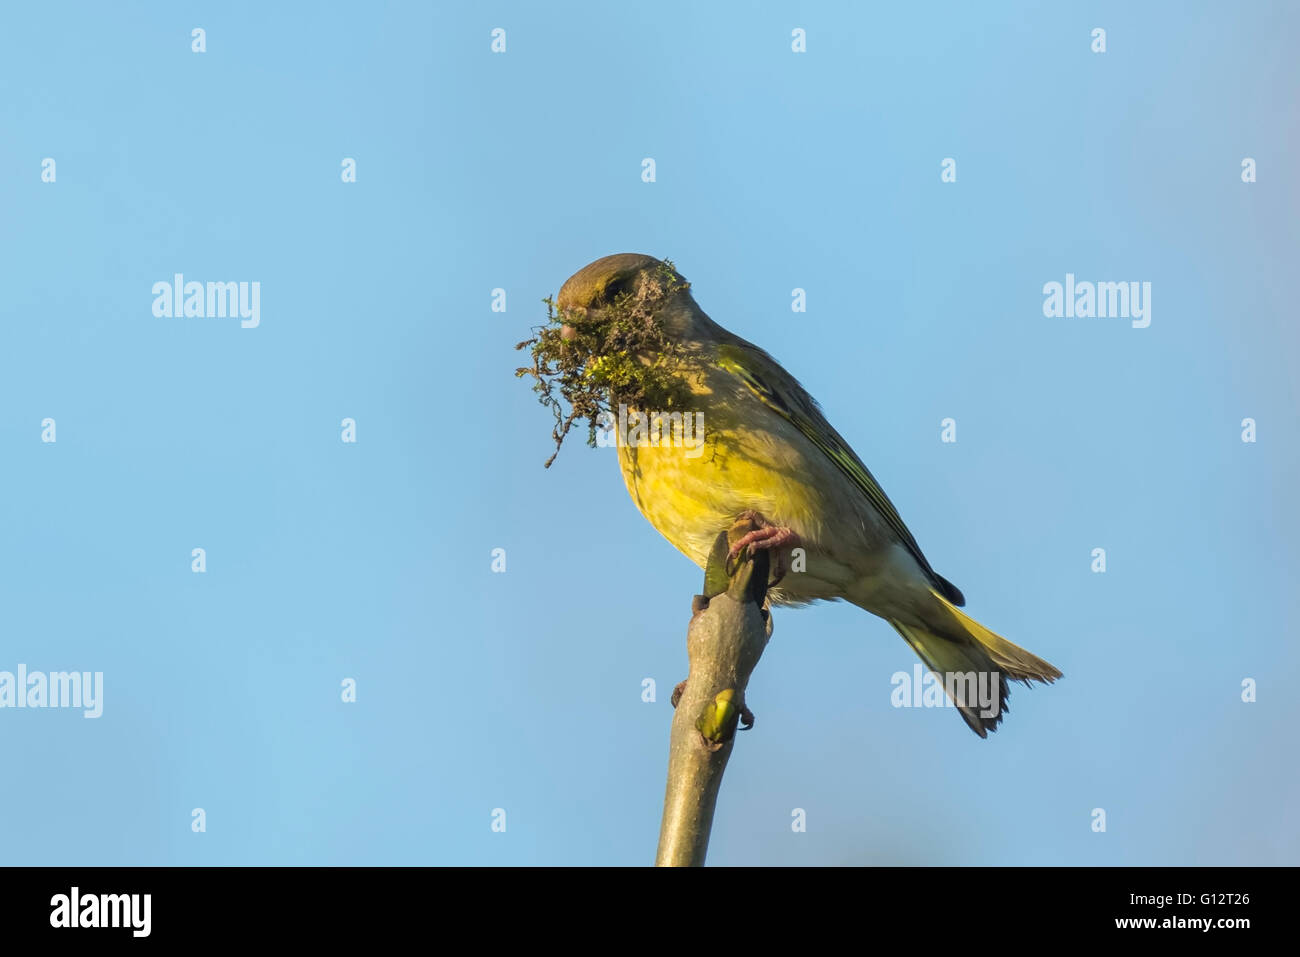 Greenfinch bird, Chloris chloris, gathering nesting material. This bird carries moss and perched on a branch. Stock Photo